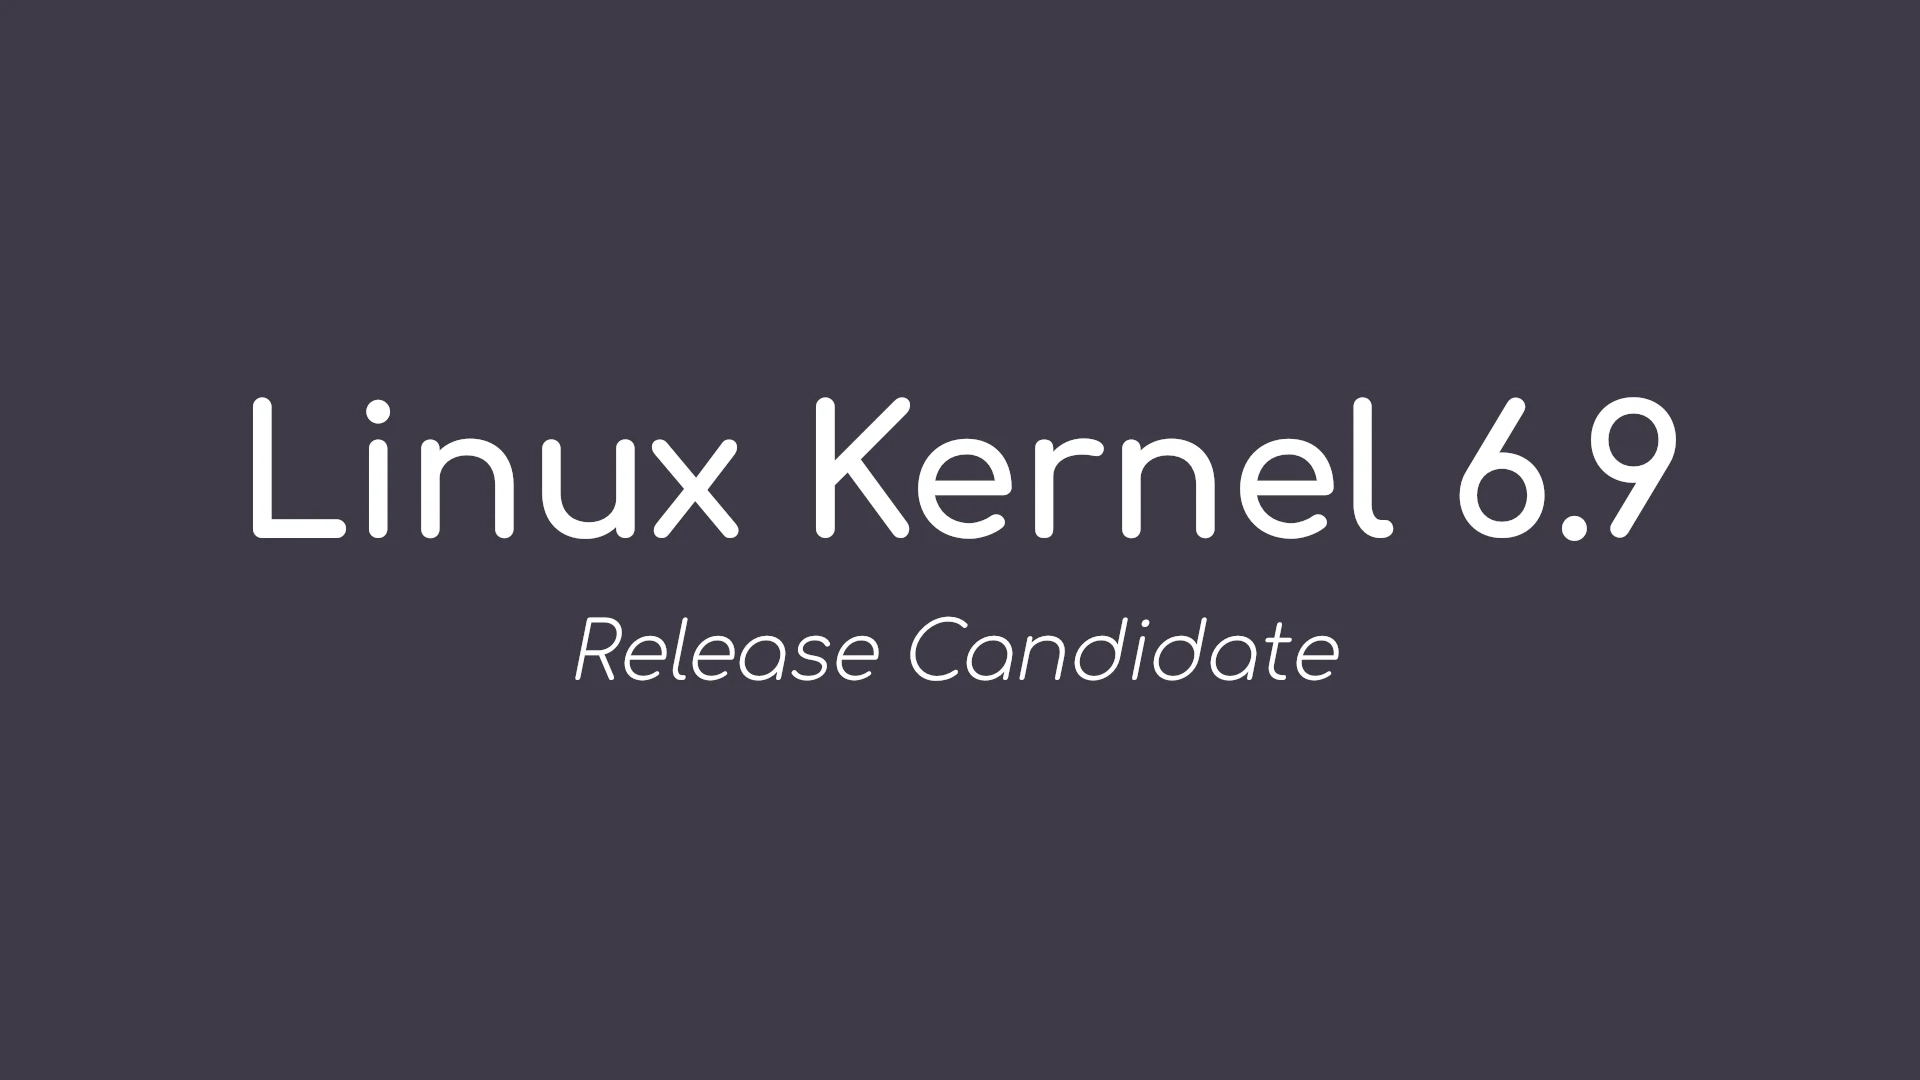 Linus Torvalds Unveils the First Release Candidate for Linux Kernel 6.9